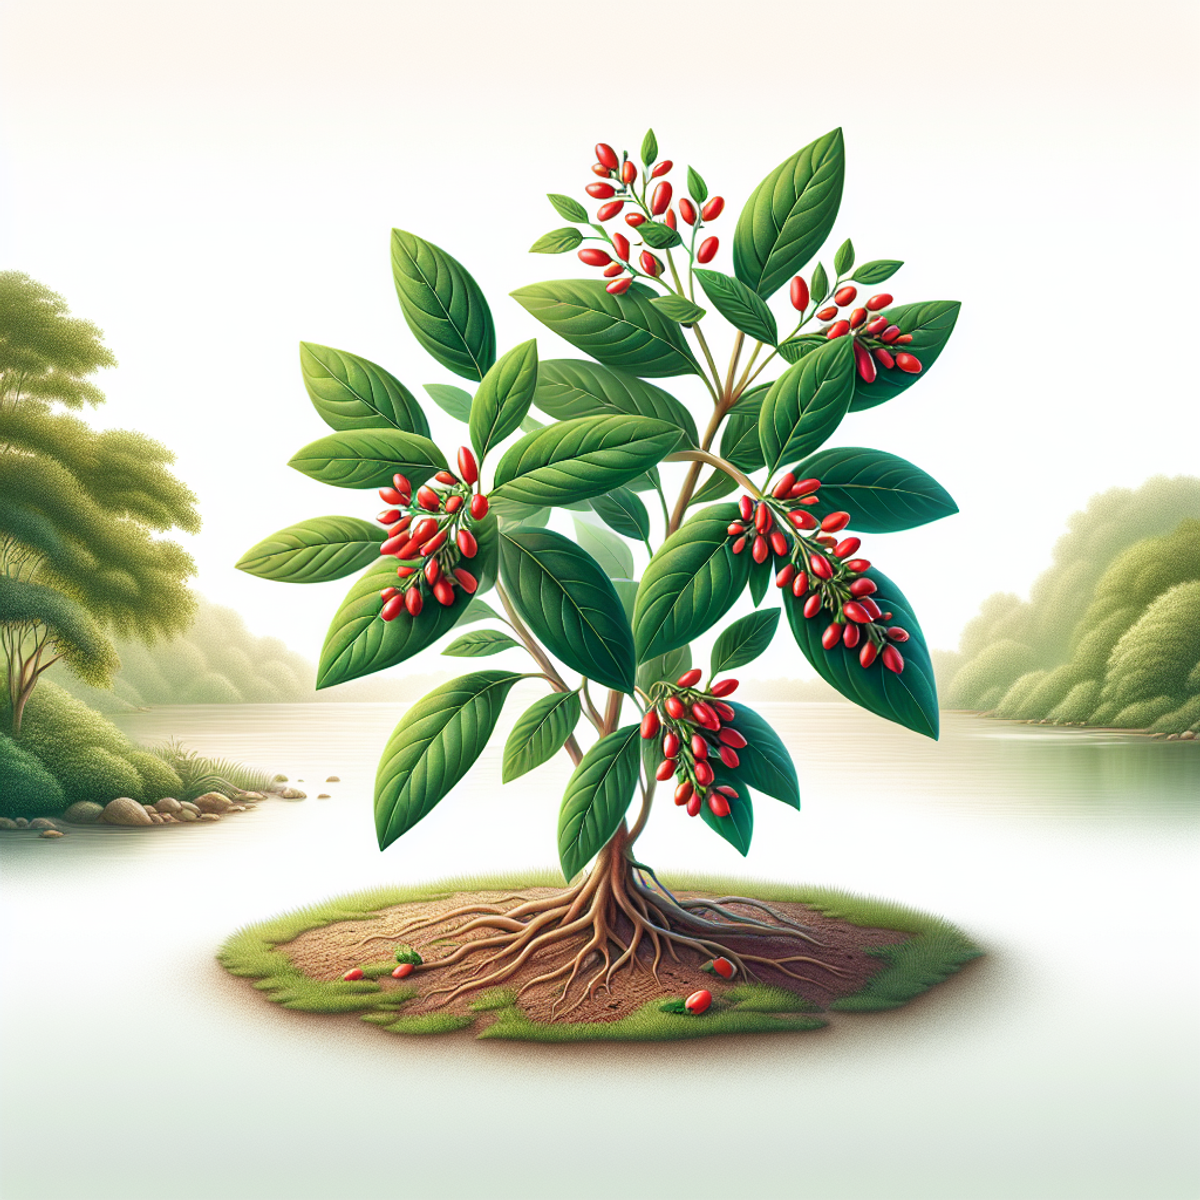 An illustration of an Ashwagandha plant with vibrant red berries, green leaves, and a peaceful background.